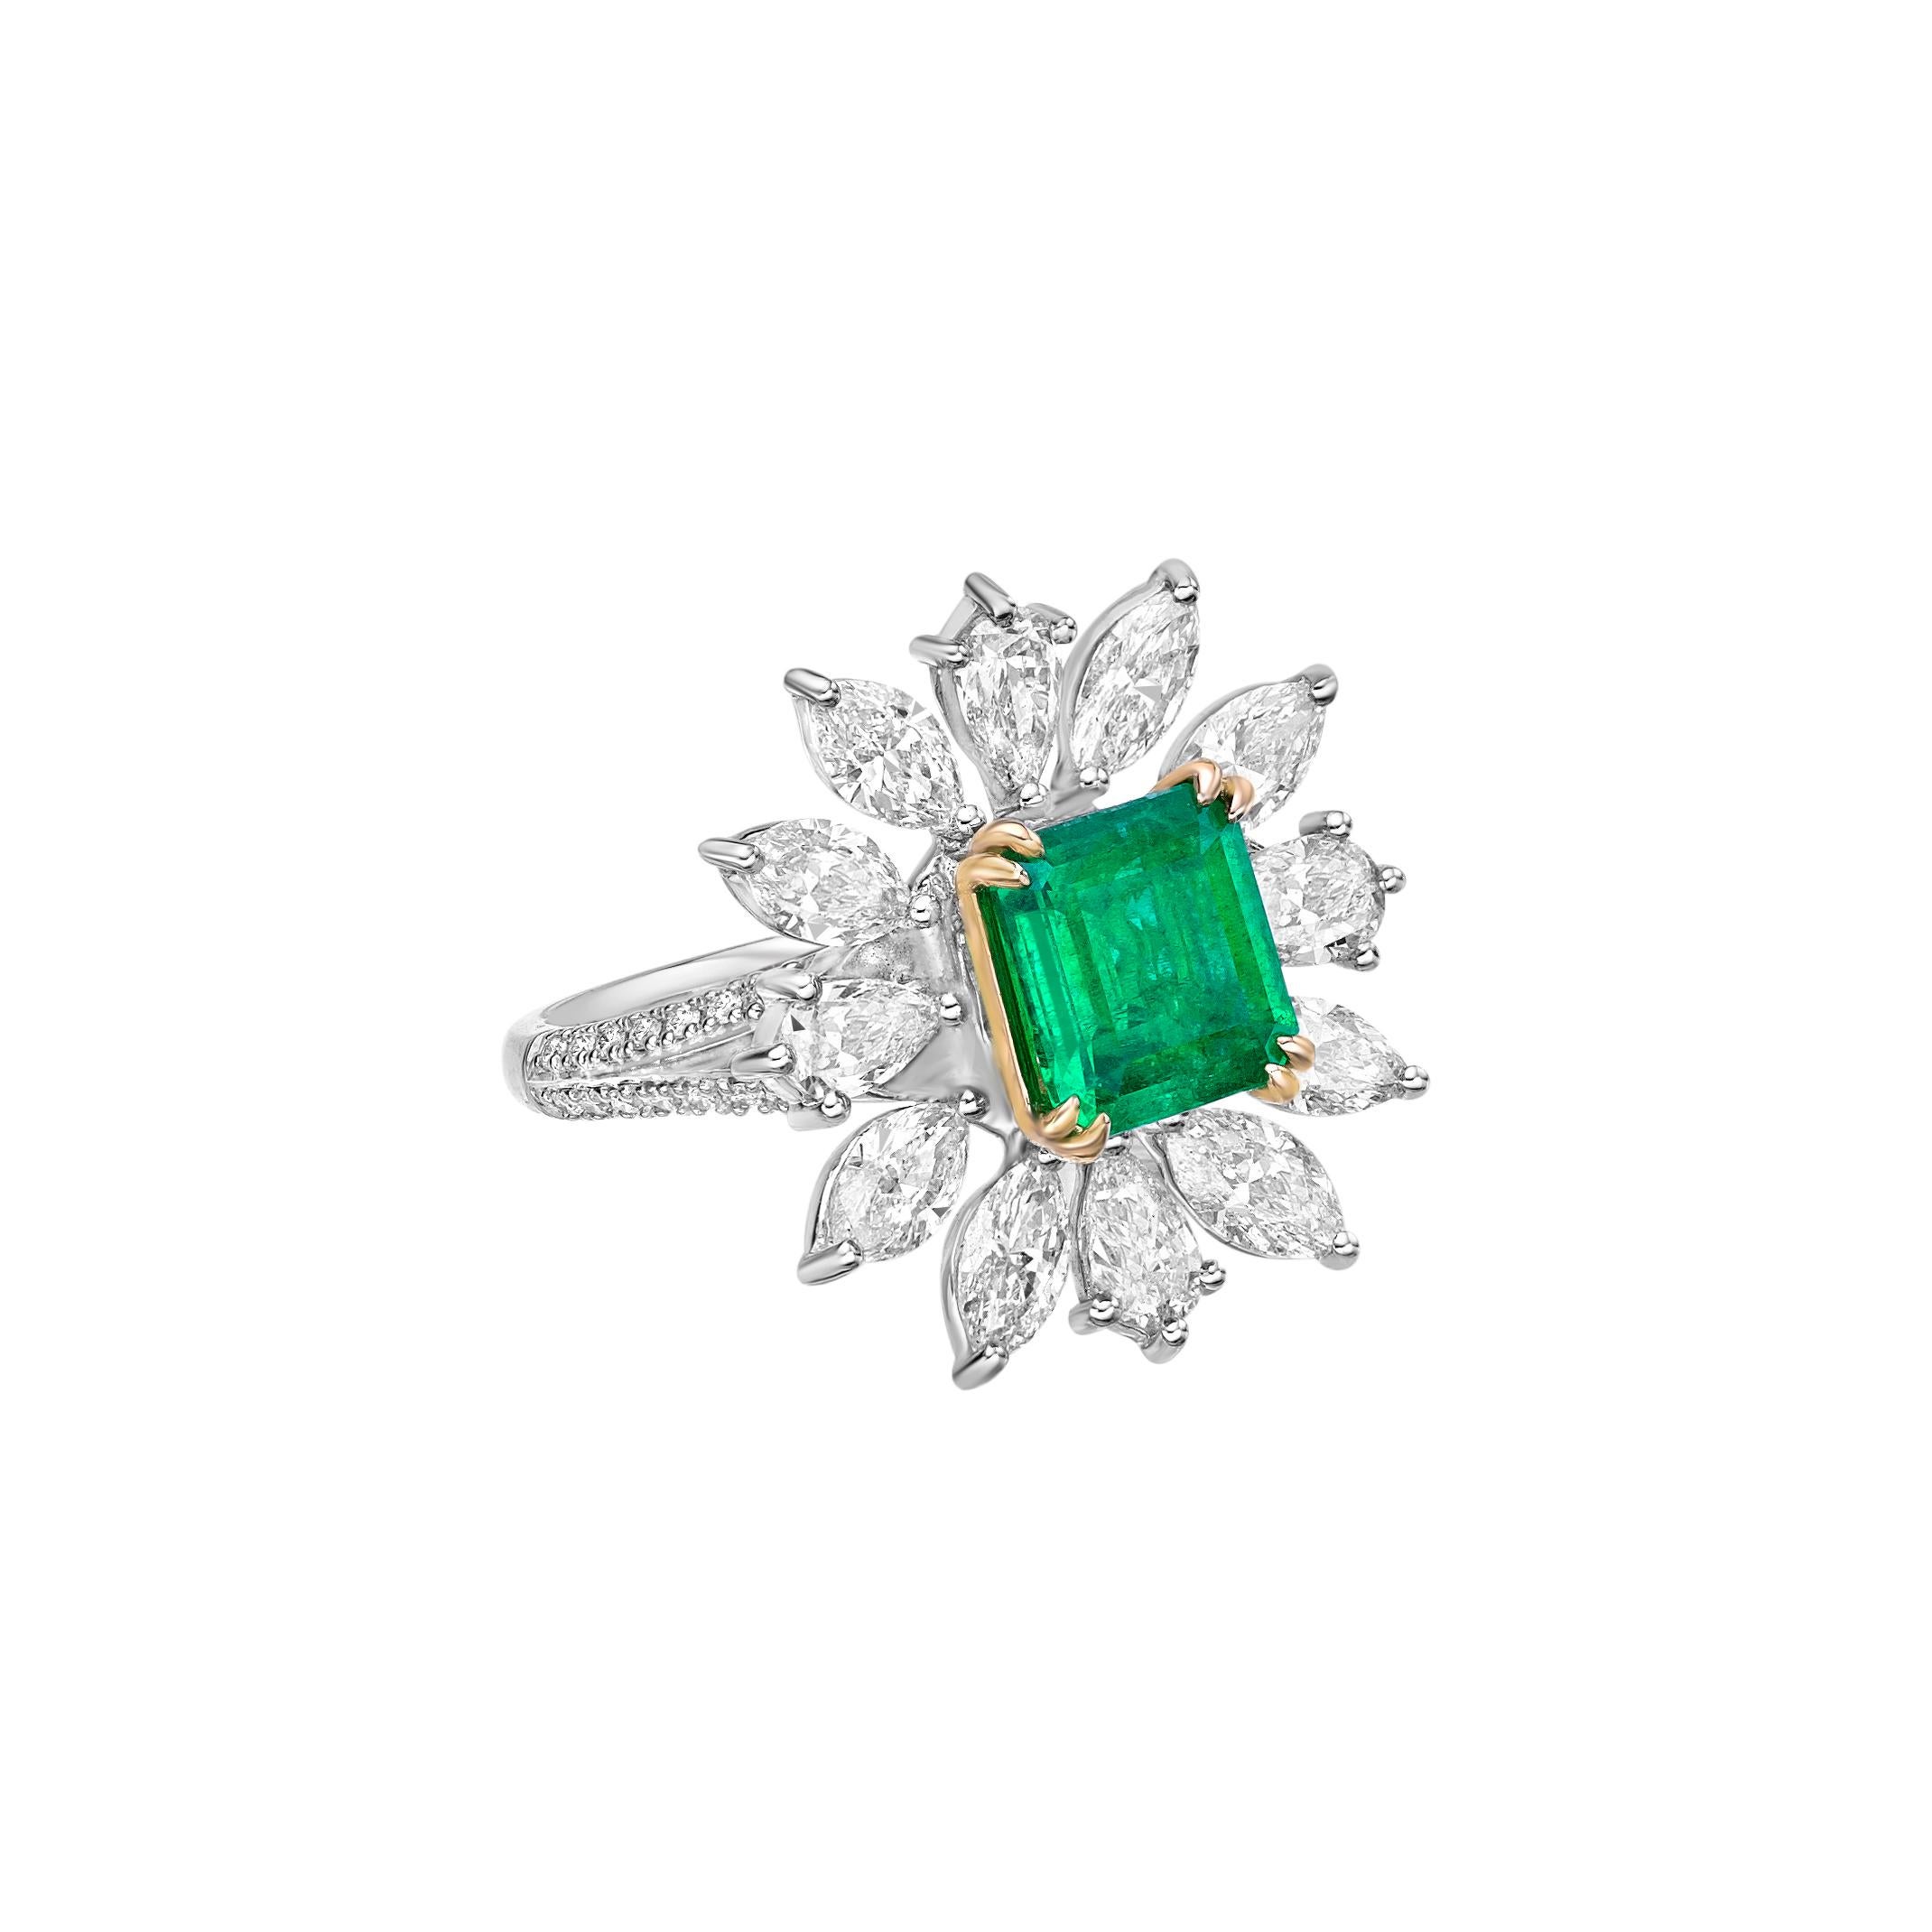 Sunflower Emeralds by Sunita Nahata Fine Design. This collection showcases brilliant green emeralds set on a bed of beautiful white diamonds set in white yellow gold. This is a small and delicate bridal ring that yet emanates glamour and